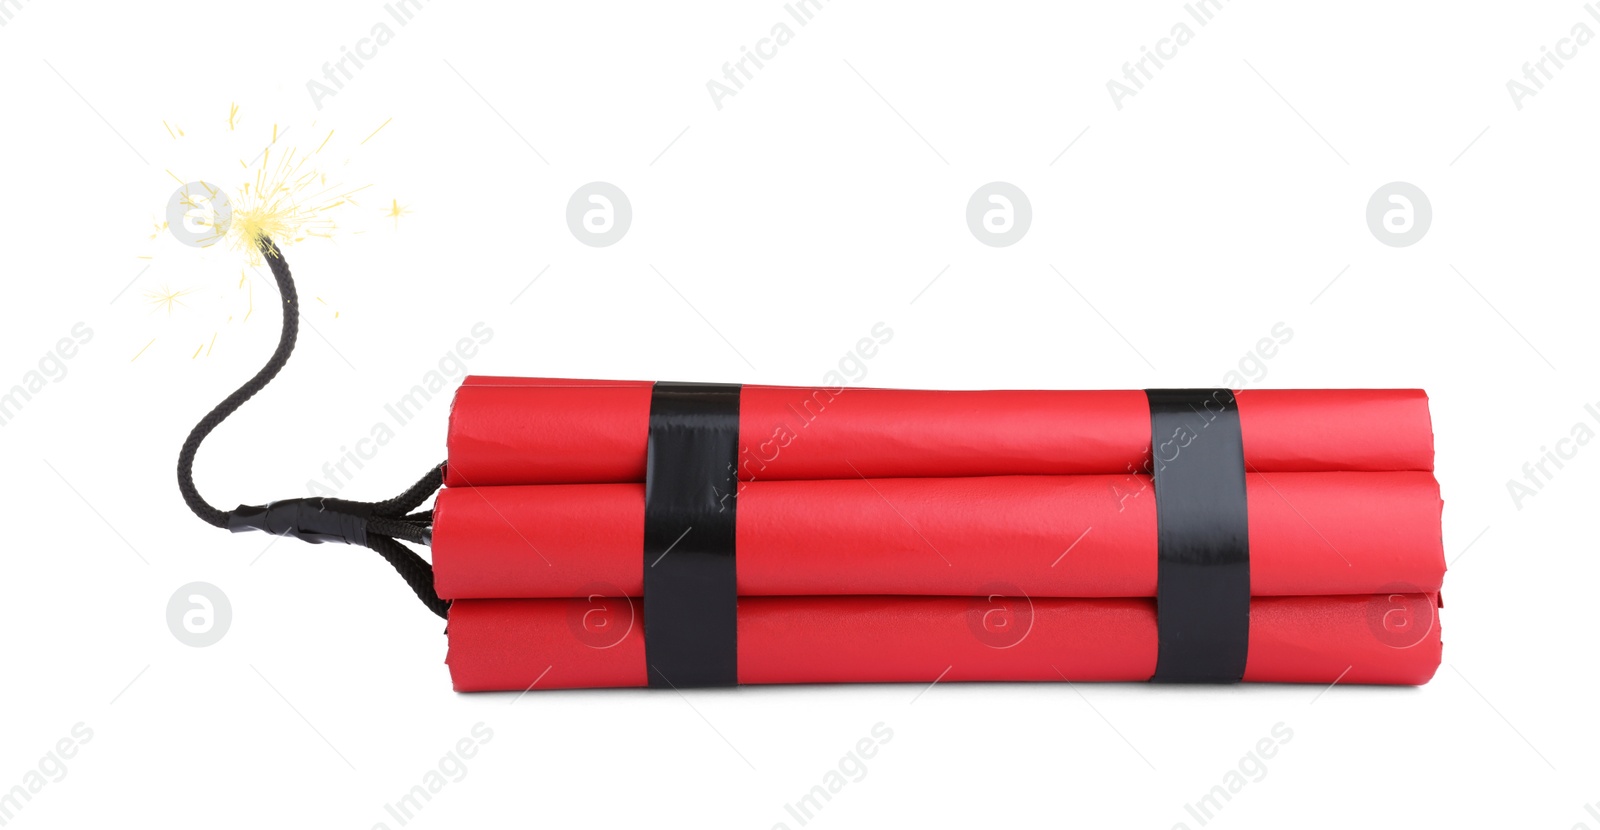 Photo of Dynamite bomb with lit fuse on white background